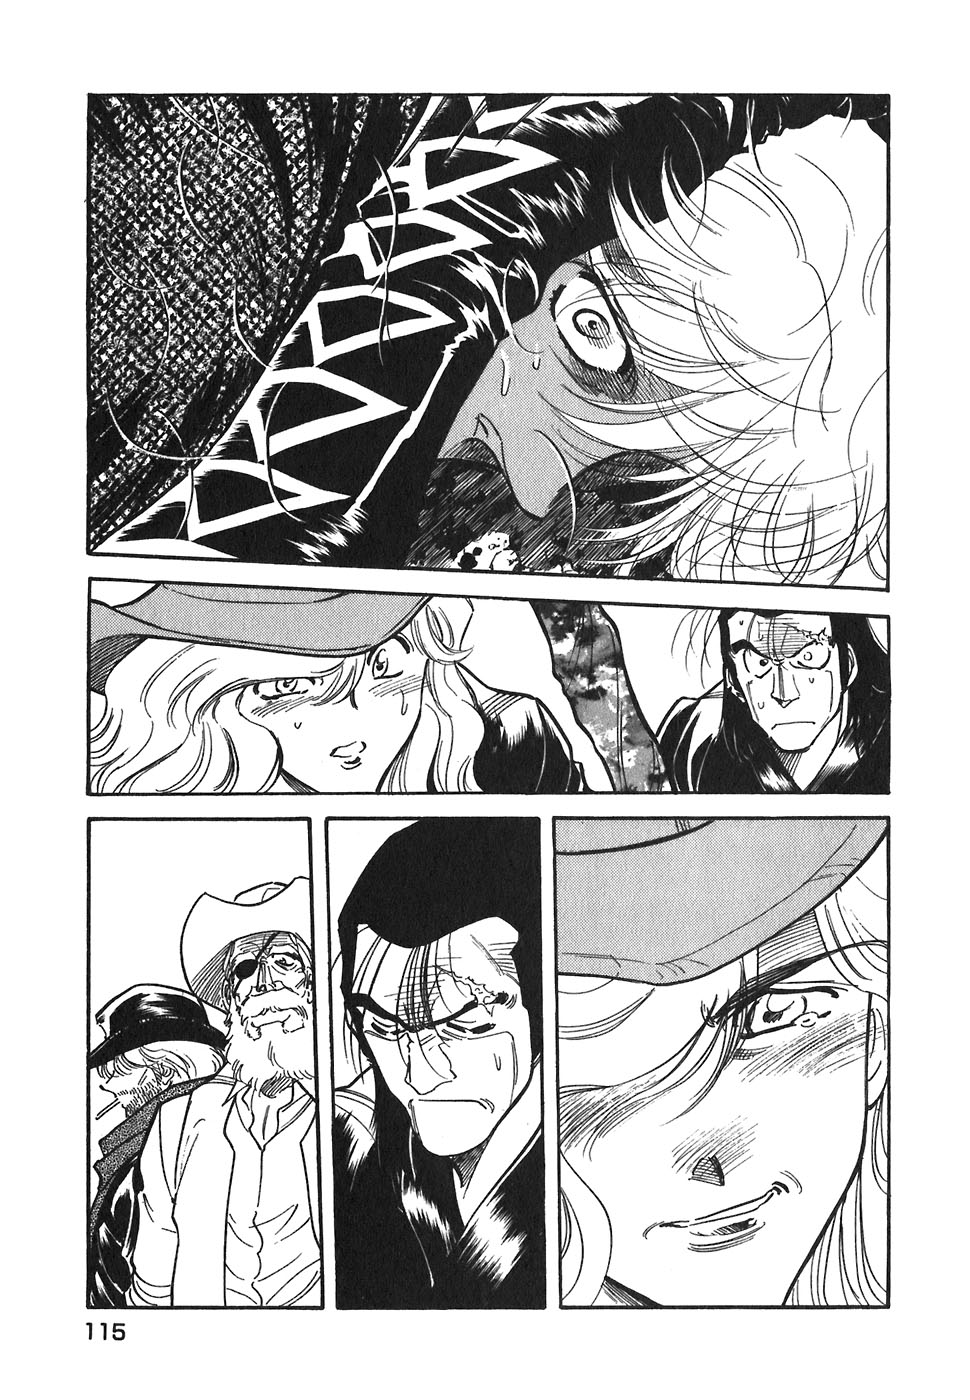 RED: Living on the Edge Vol. 10 Ch. 76 Death Wish 5